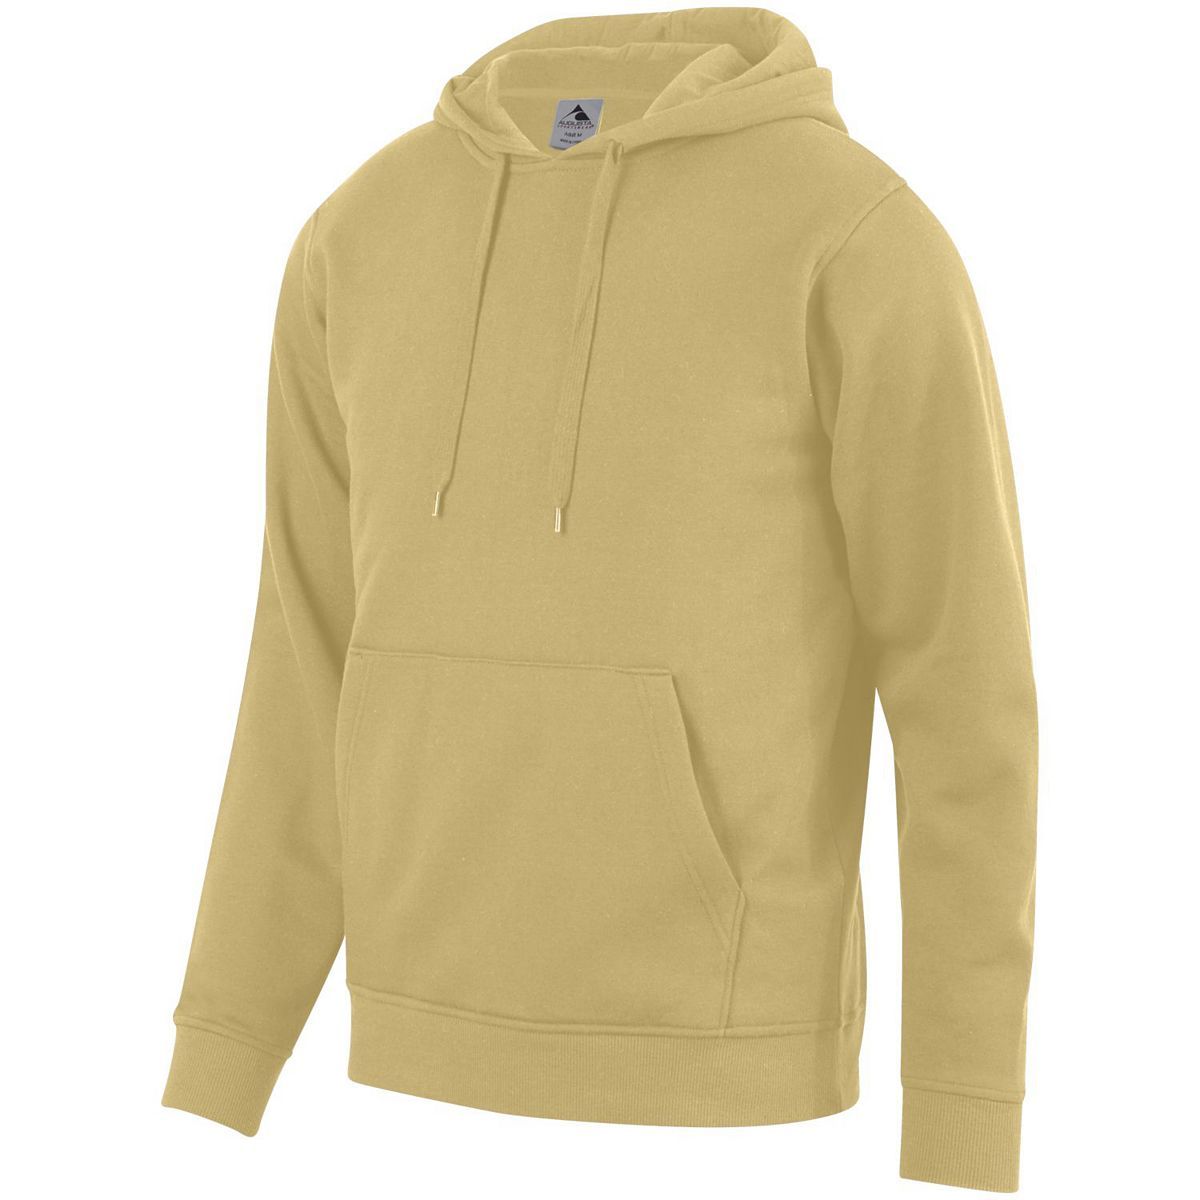 Augusta Sportswear Youth 60/40 Fleece Hoodie in Vegas Gold  -Part of the Youth, Youth-Hoodie, Hoodies, Augusta-Products product lines at KanaleyCreations.com